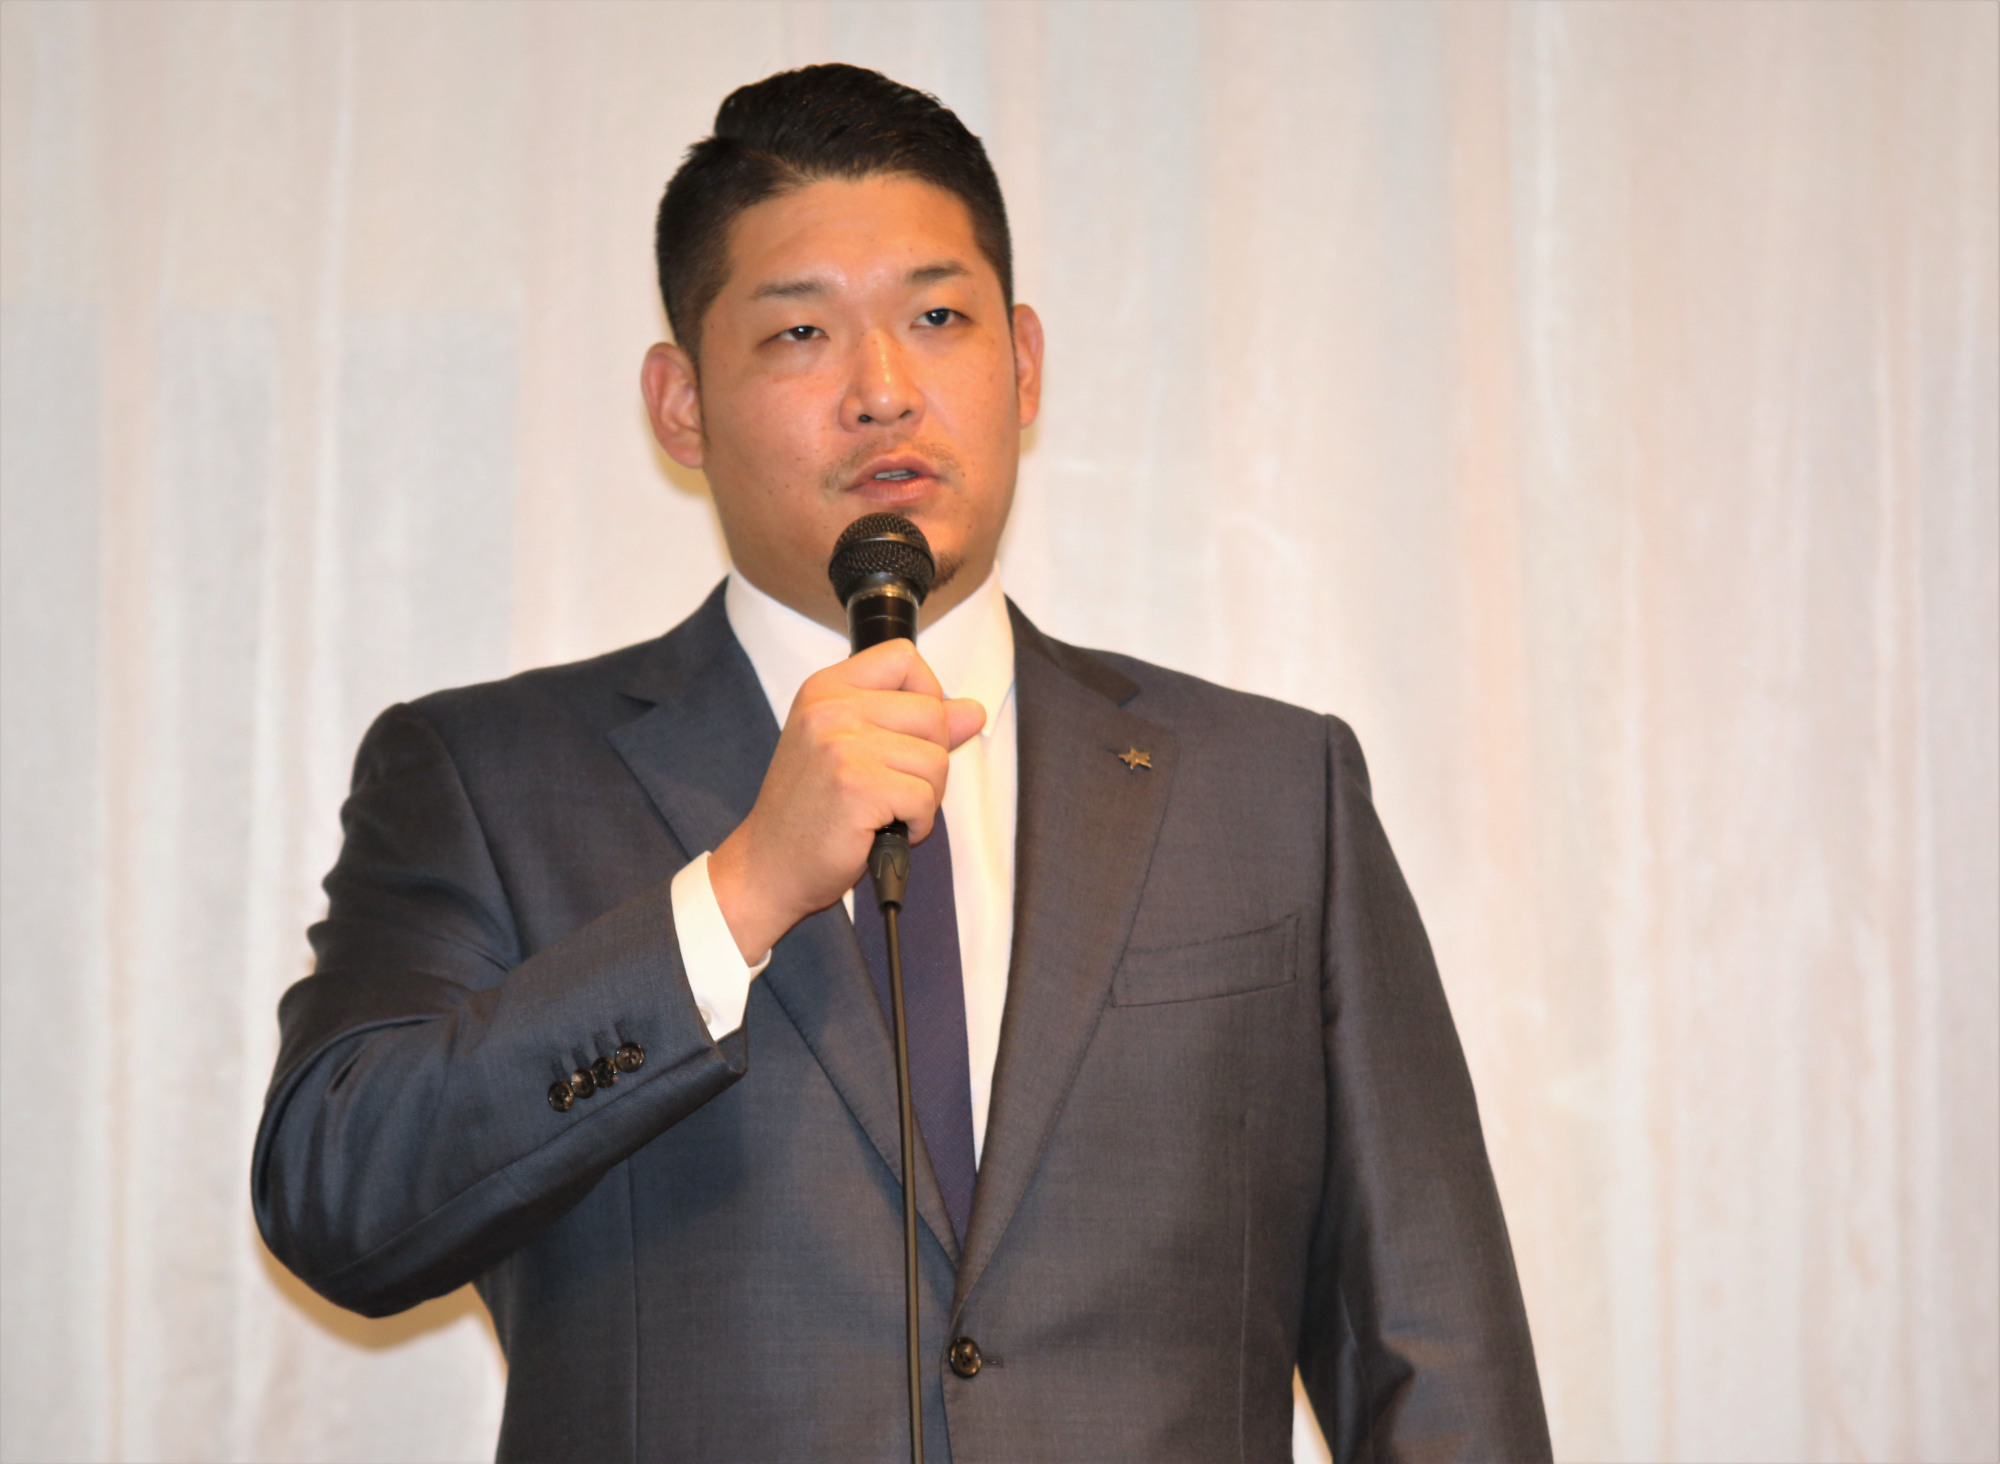 BayStars slugger Yoshitomo Tsutsugo speaks at a news conference at a Yokohama hotel on Tuesday. The 27-year-old announced his intention to go to the major leagues via the posting system this offseason. | KAZ NAGATSUKA